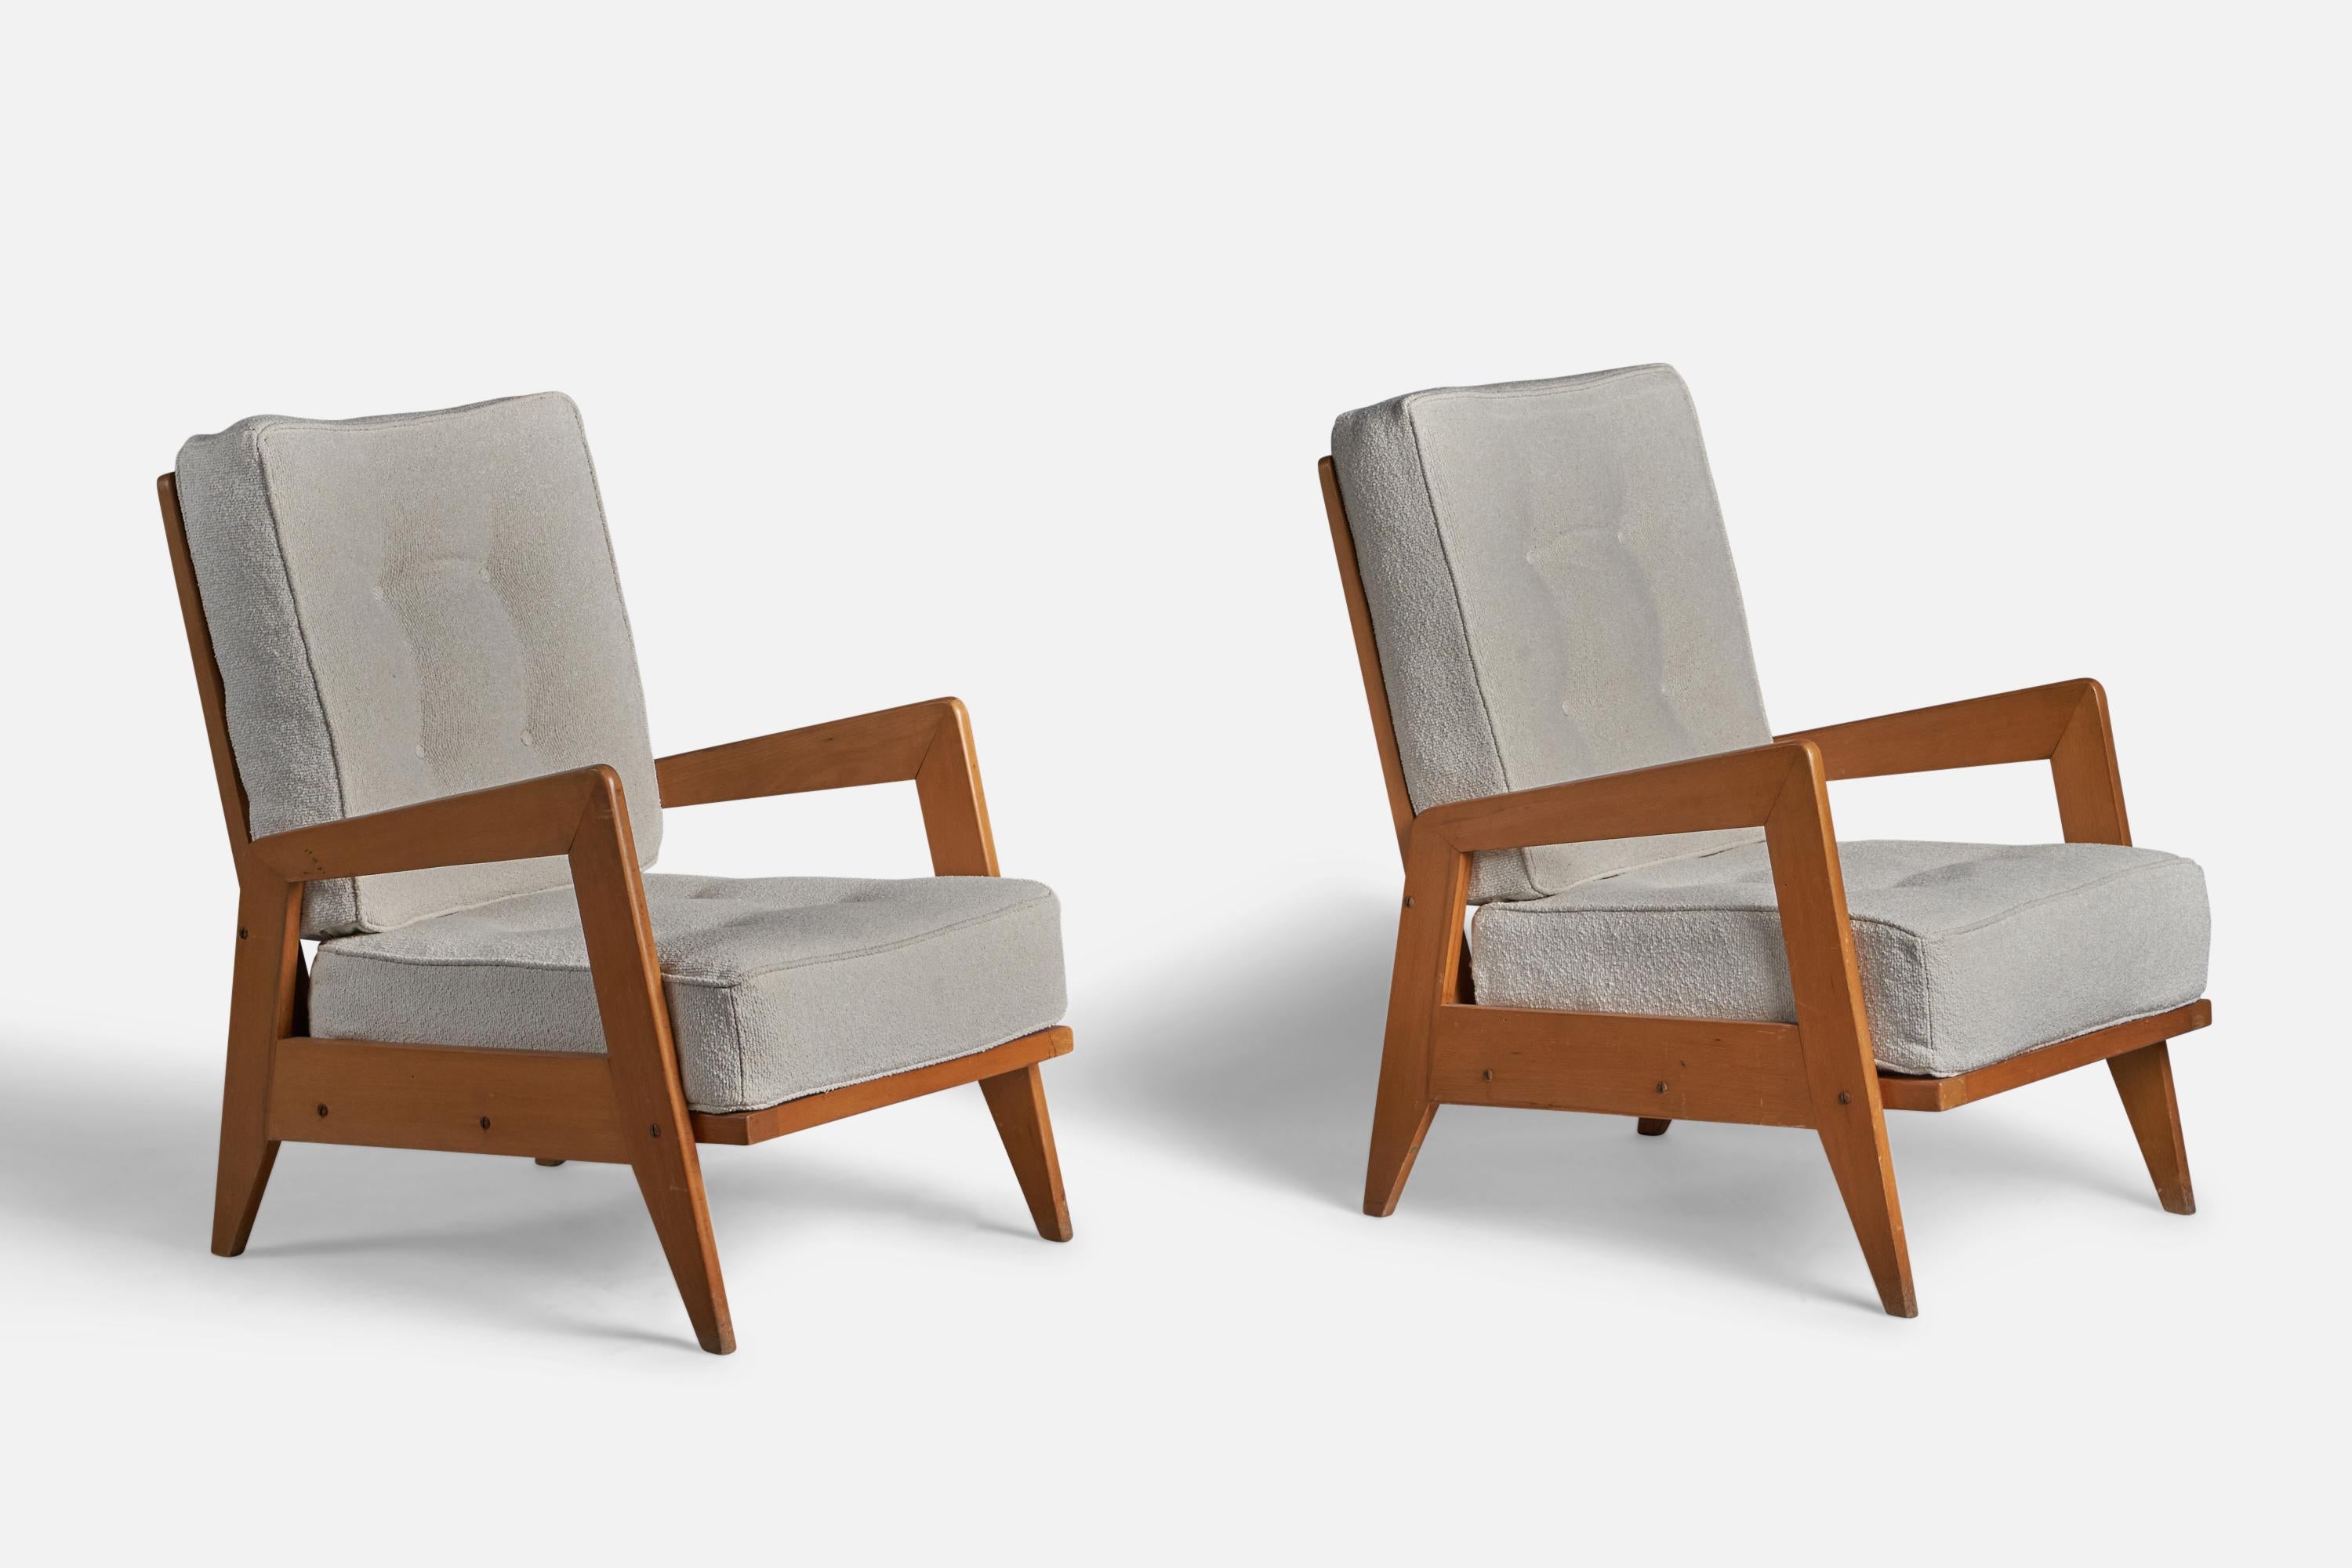 A pair of off-white fabric and wood lounge chairs, designed and produced in Italy, 1950s.

14